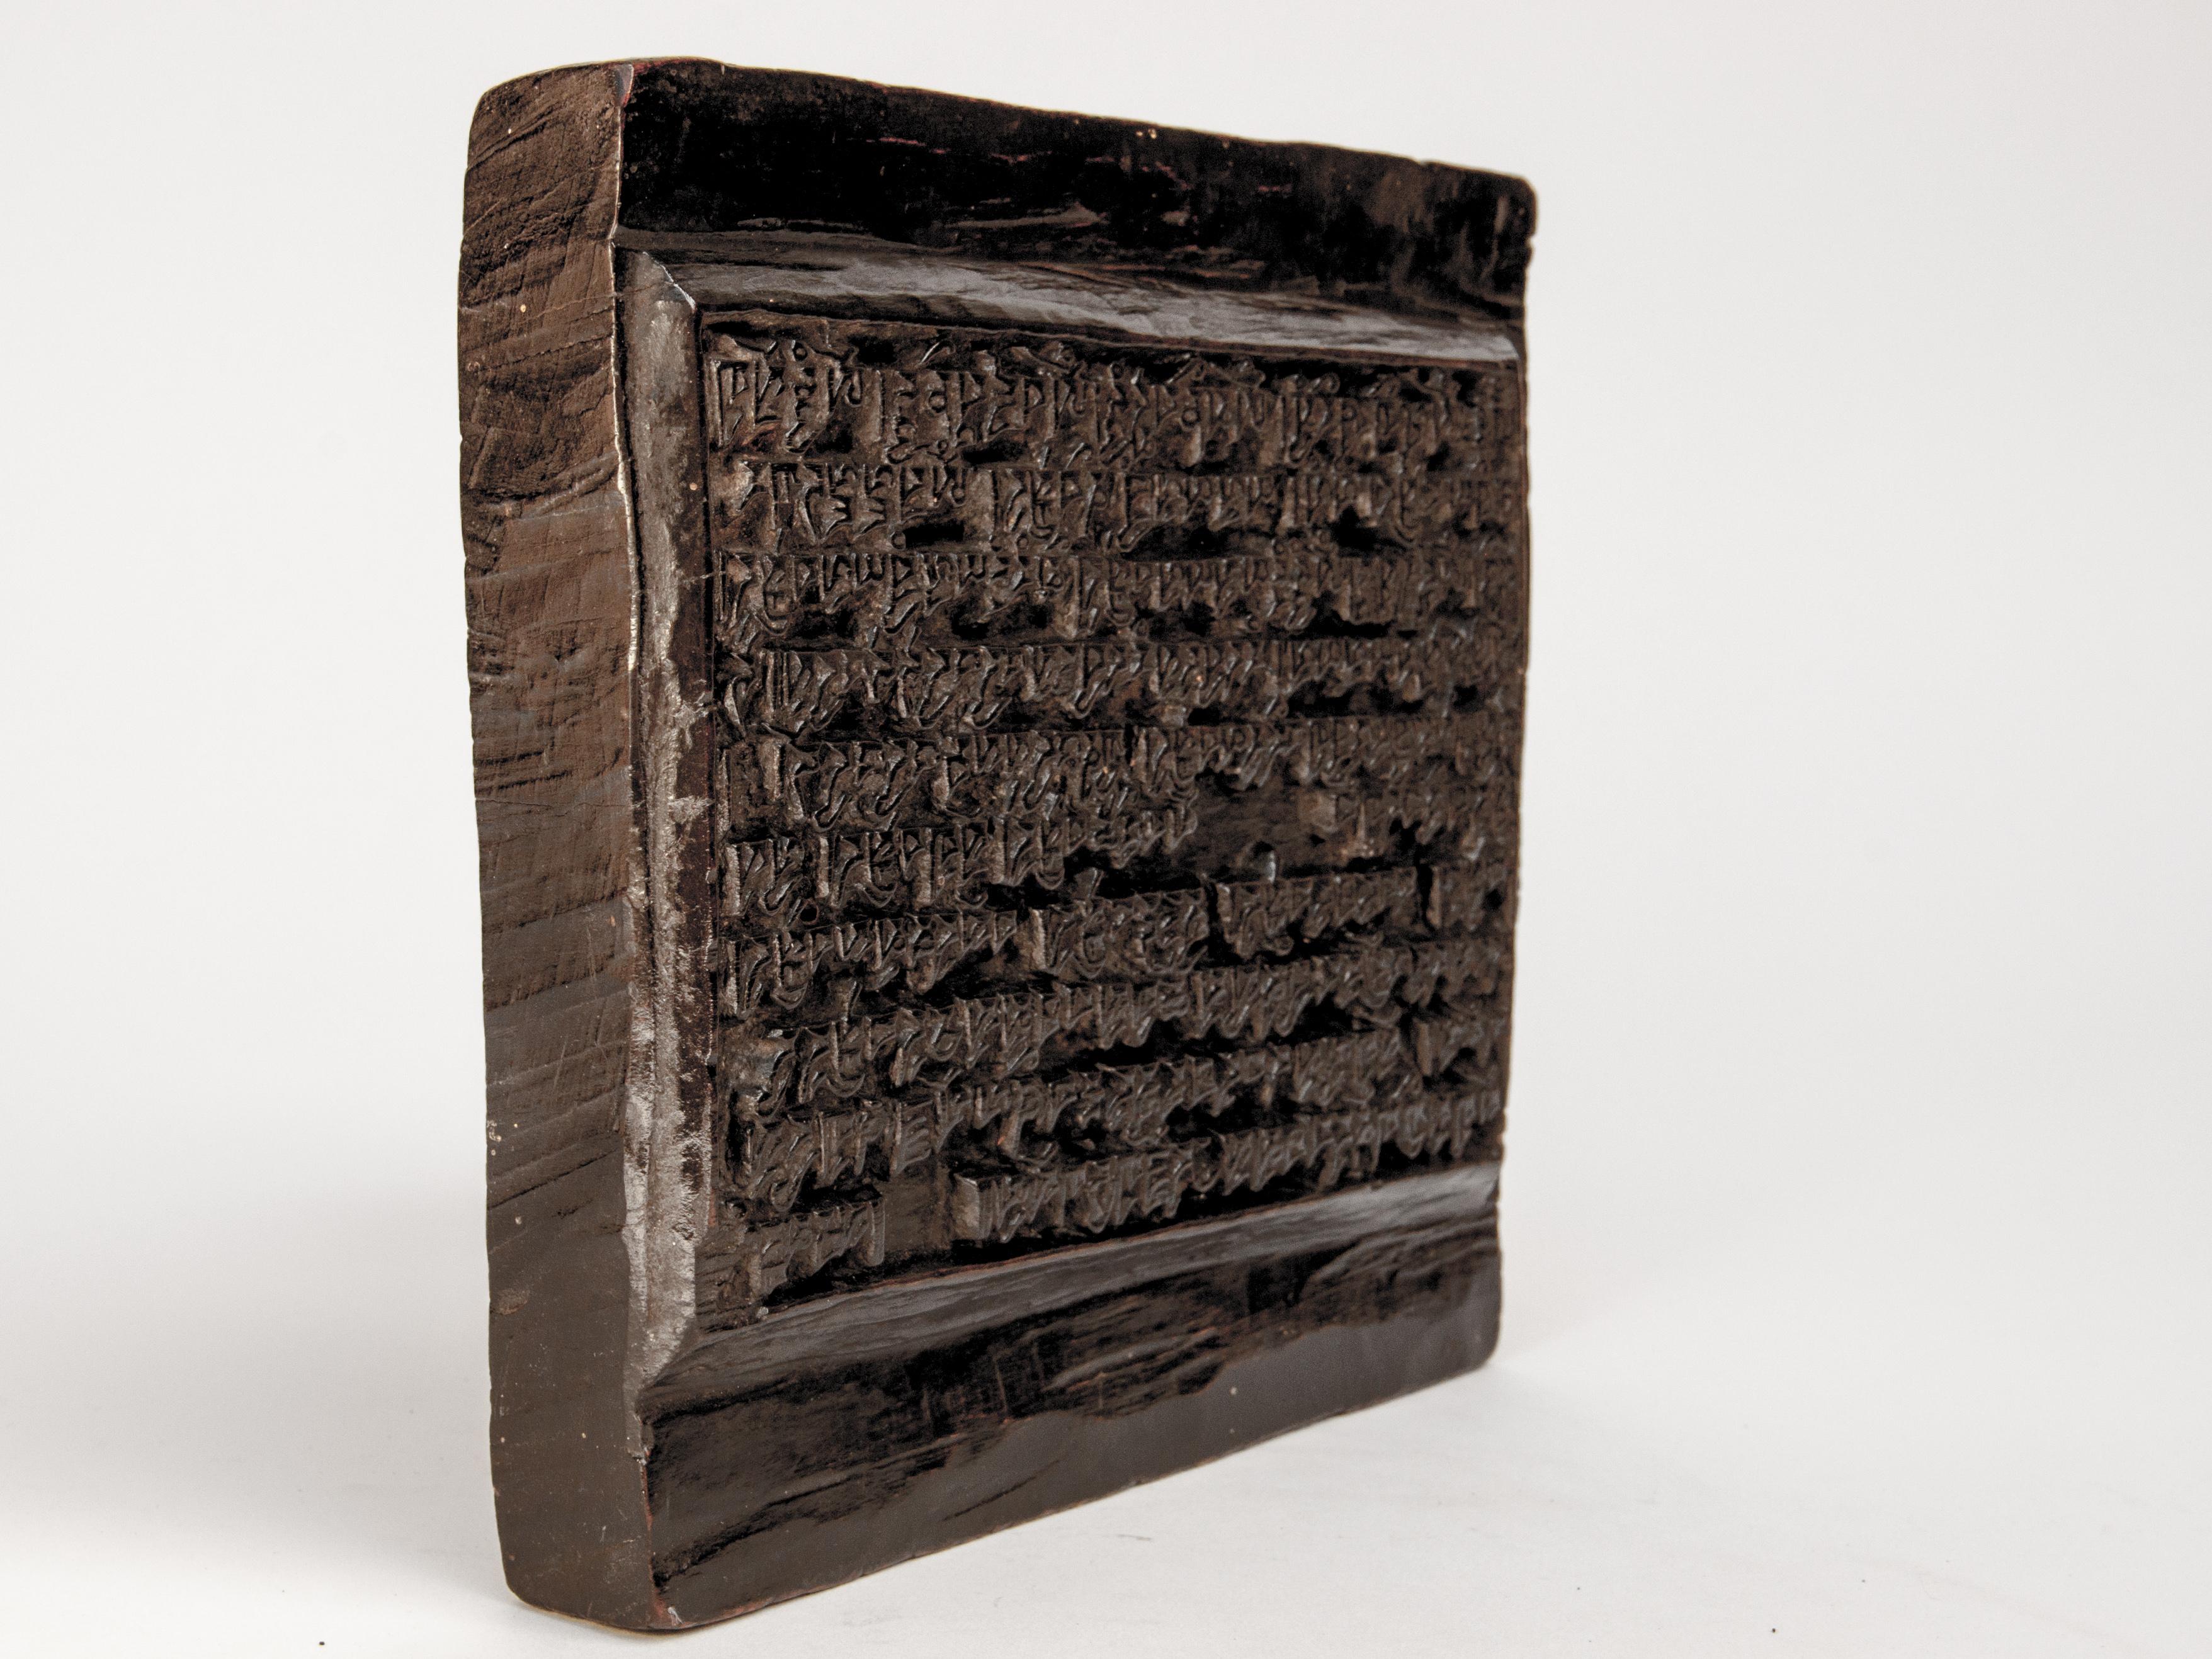 Vintage wood print bock hand carved religious text, Tibet, early 20th century.
Hand carved from wood, this block was used to print religious texts which were bound together and preserved in temples and monasteries and used for recitation in